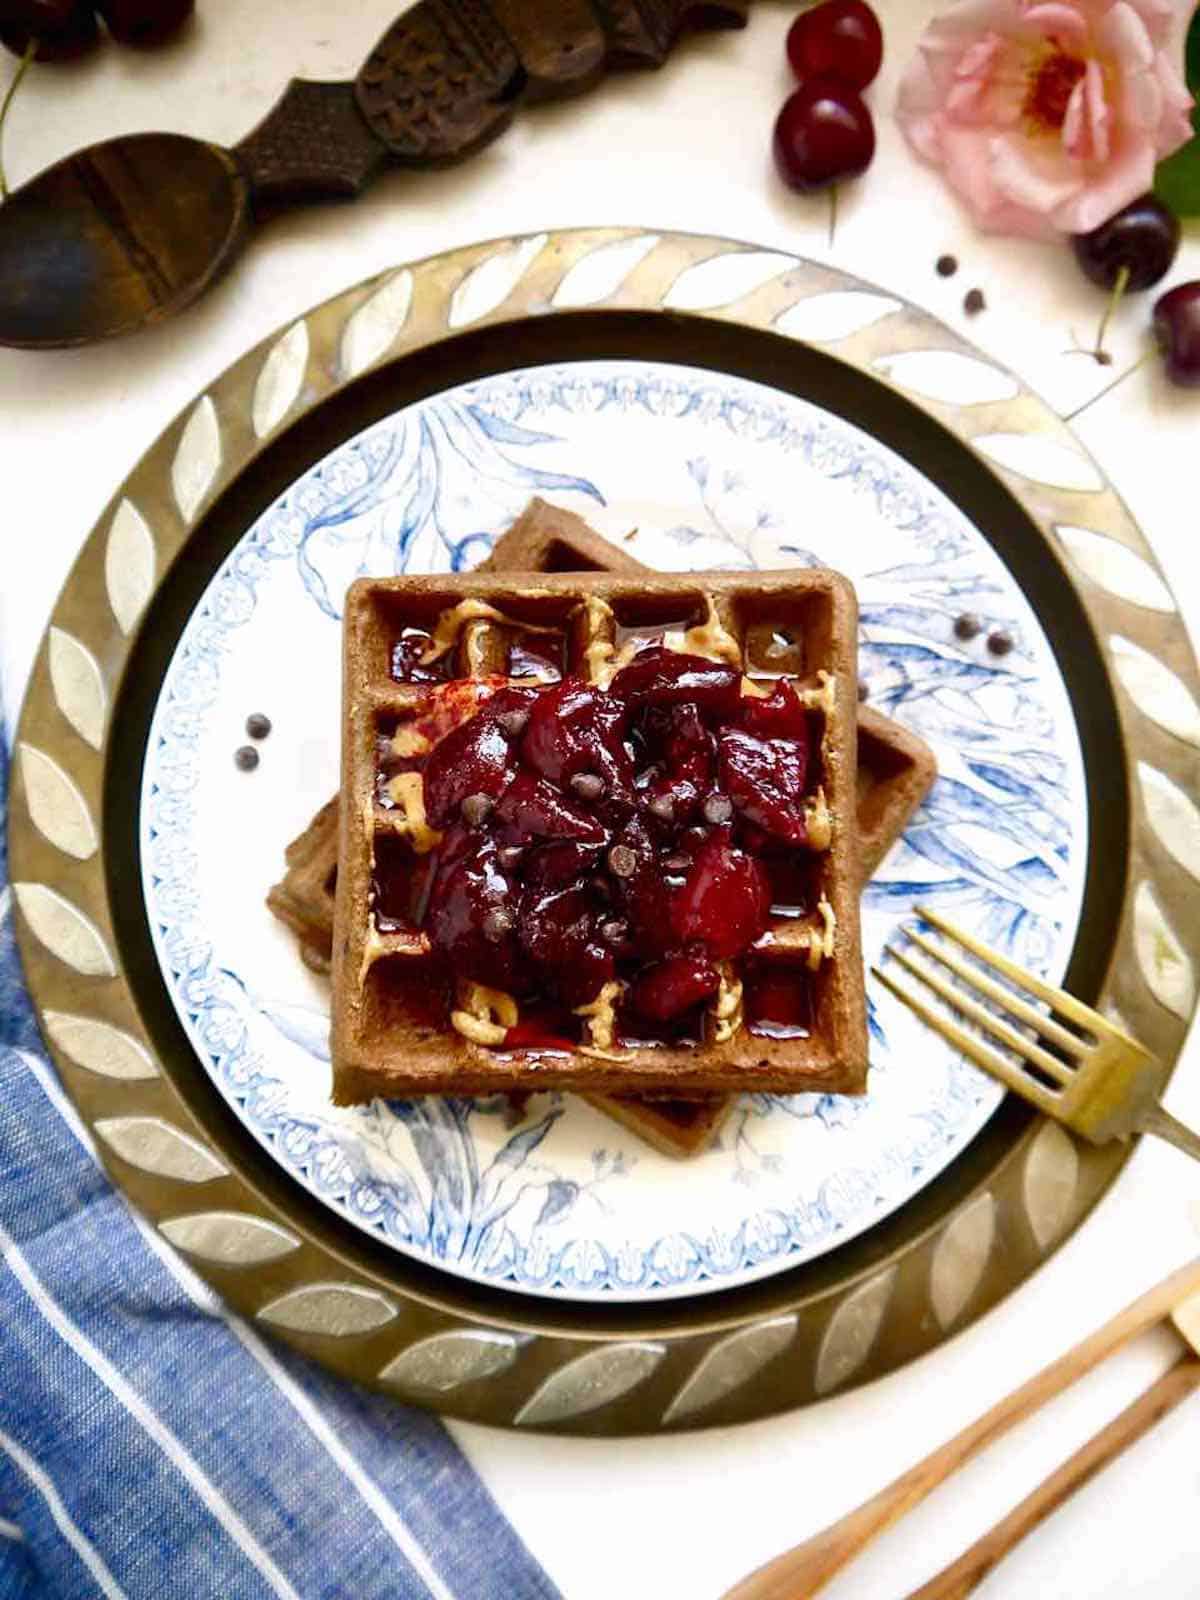 Gluten free chocolate waffles with cherry compote on top.